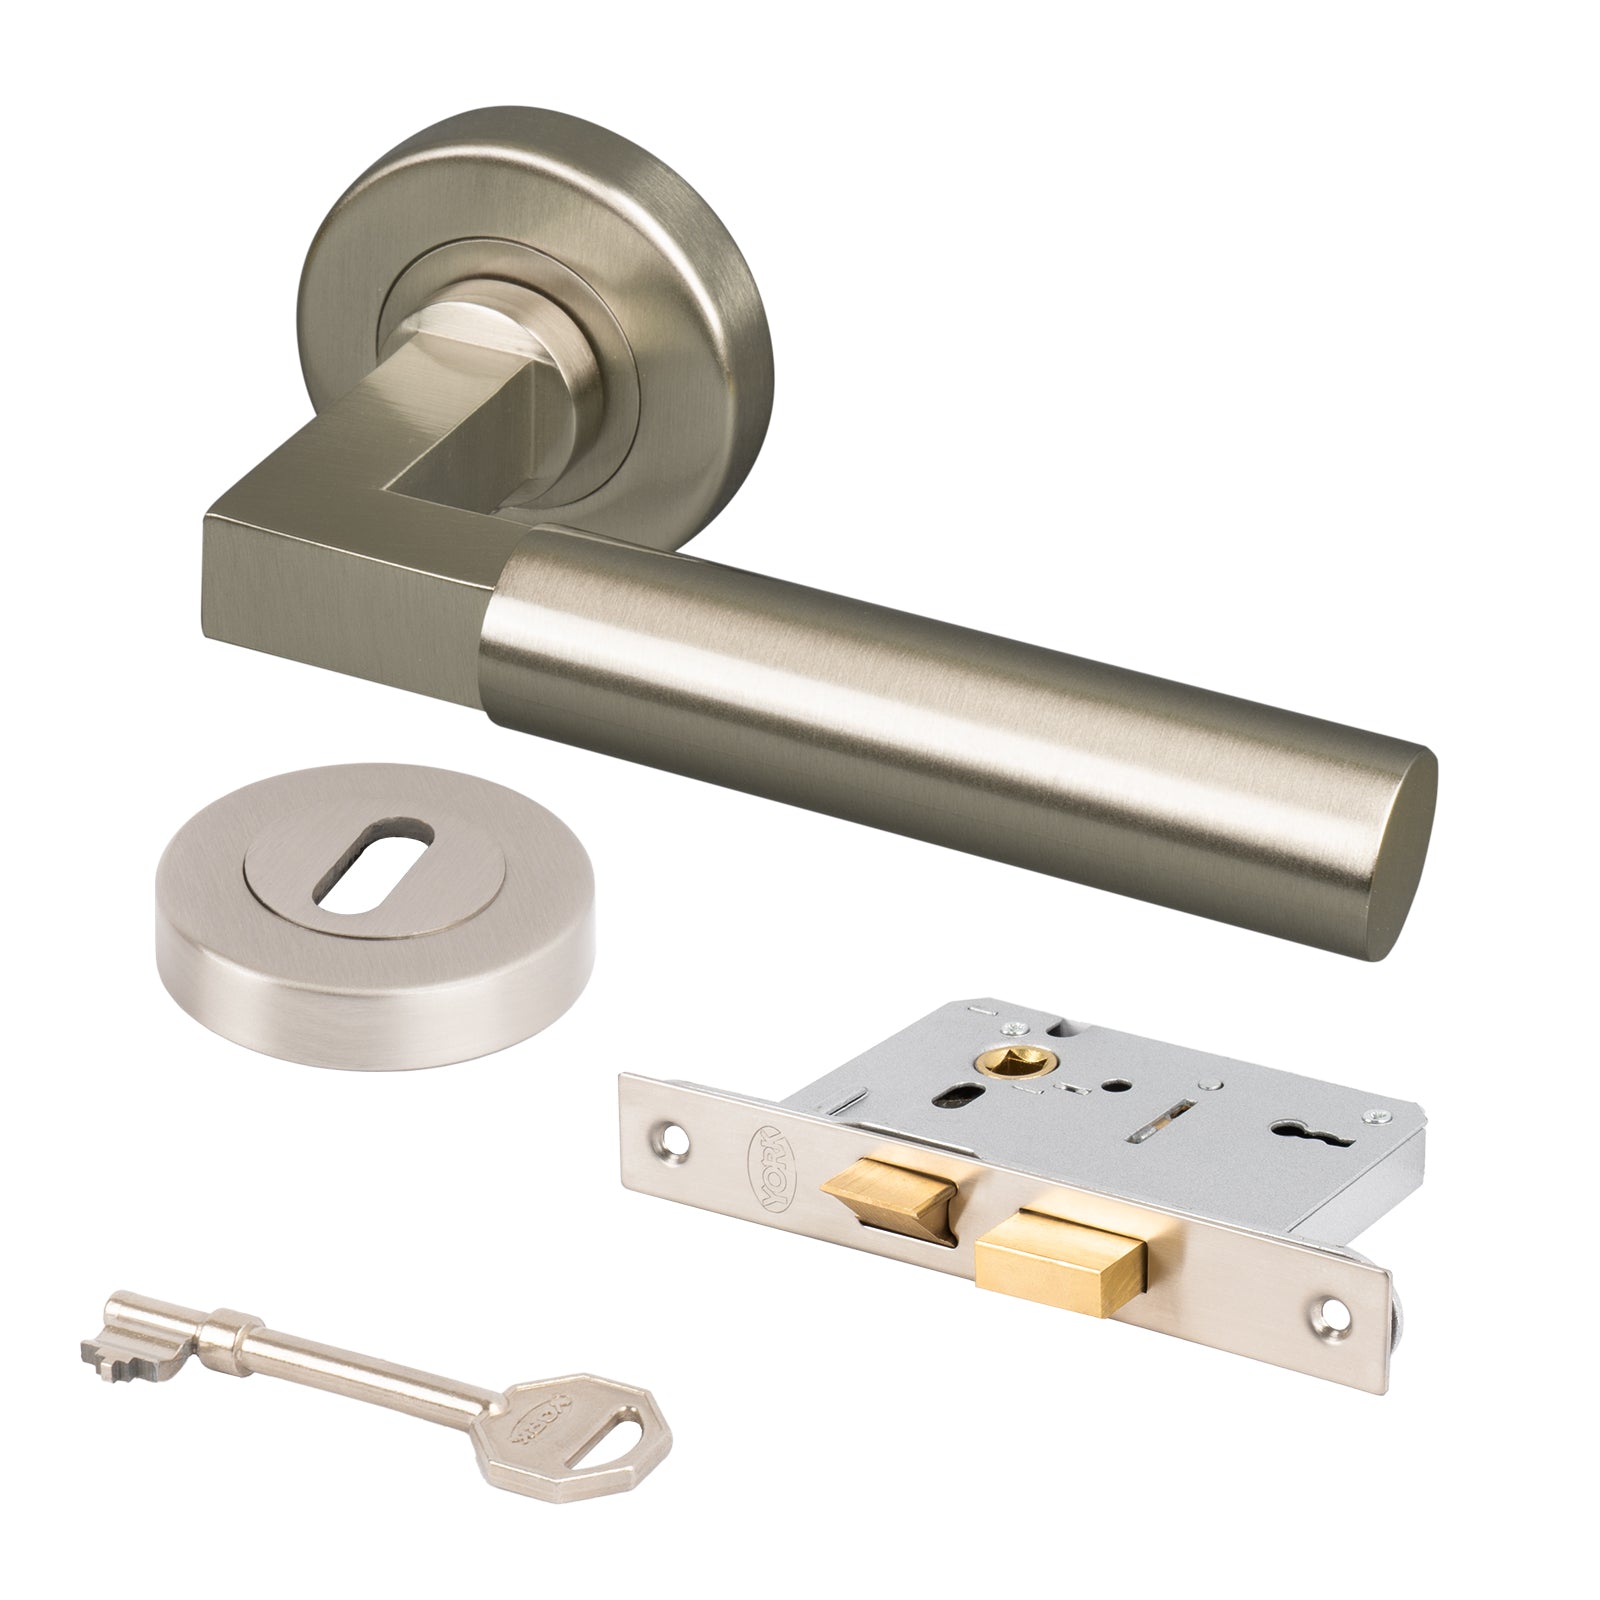 satin nickel round rose door handles 3 lever lock set with keyhole cover